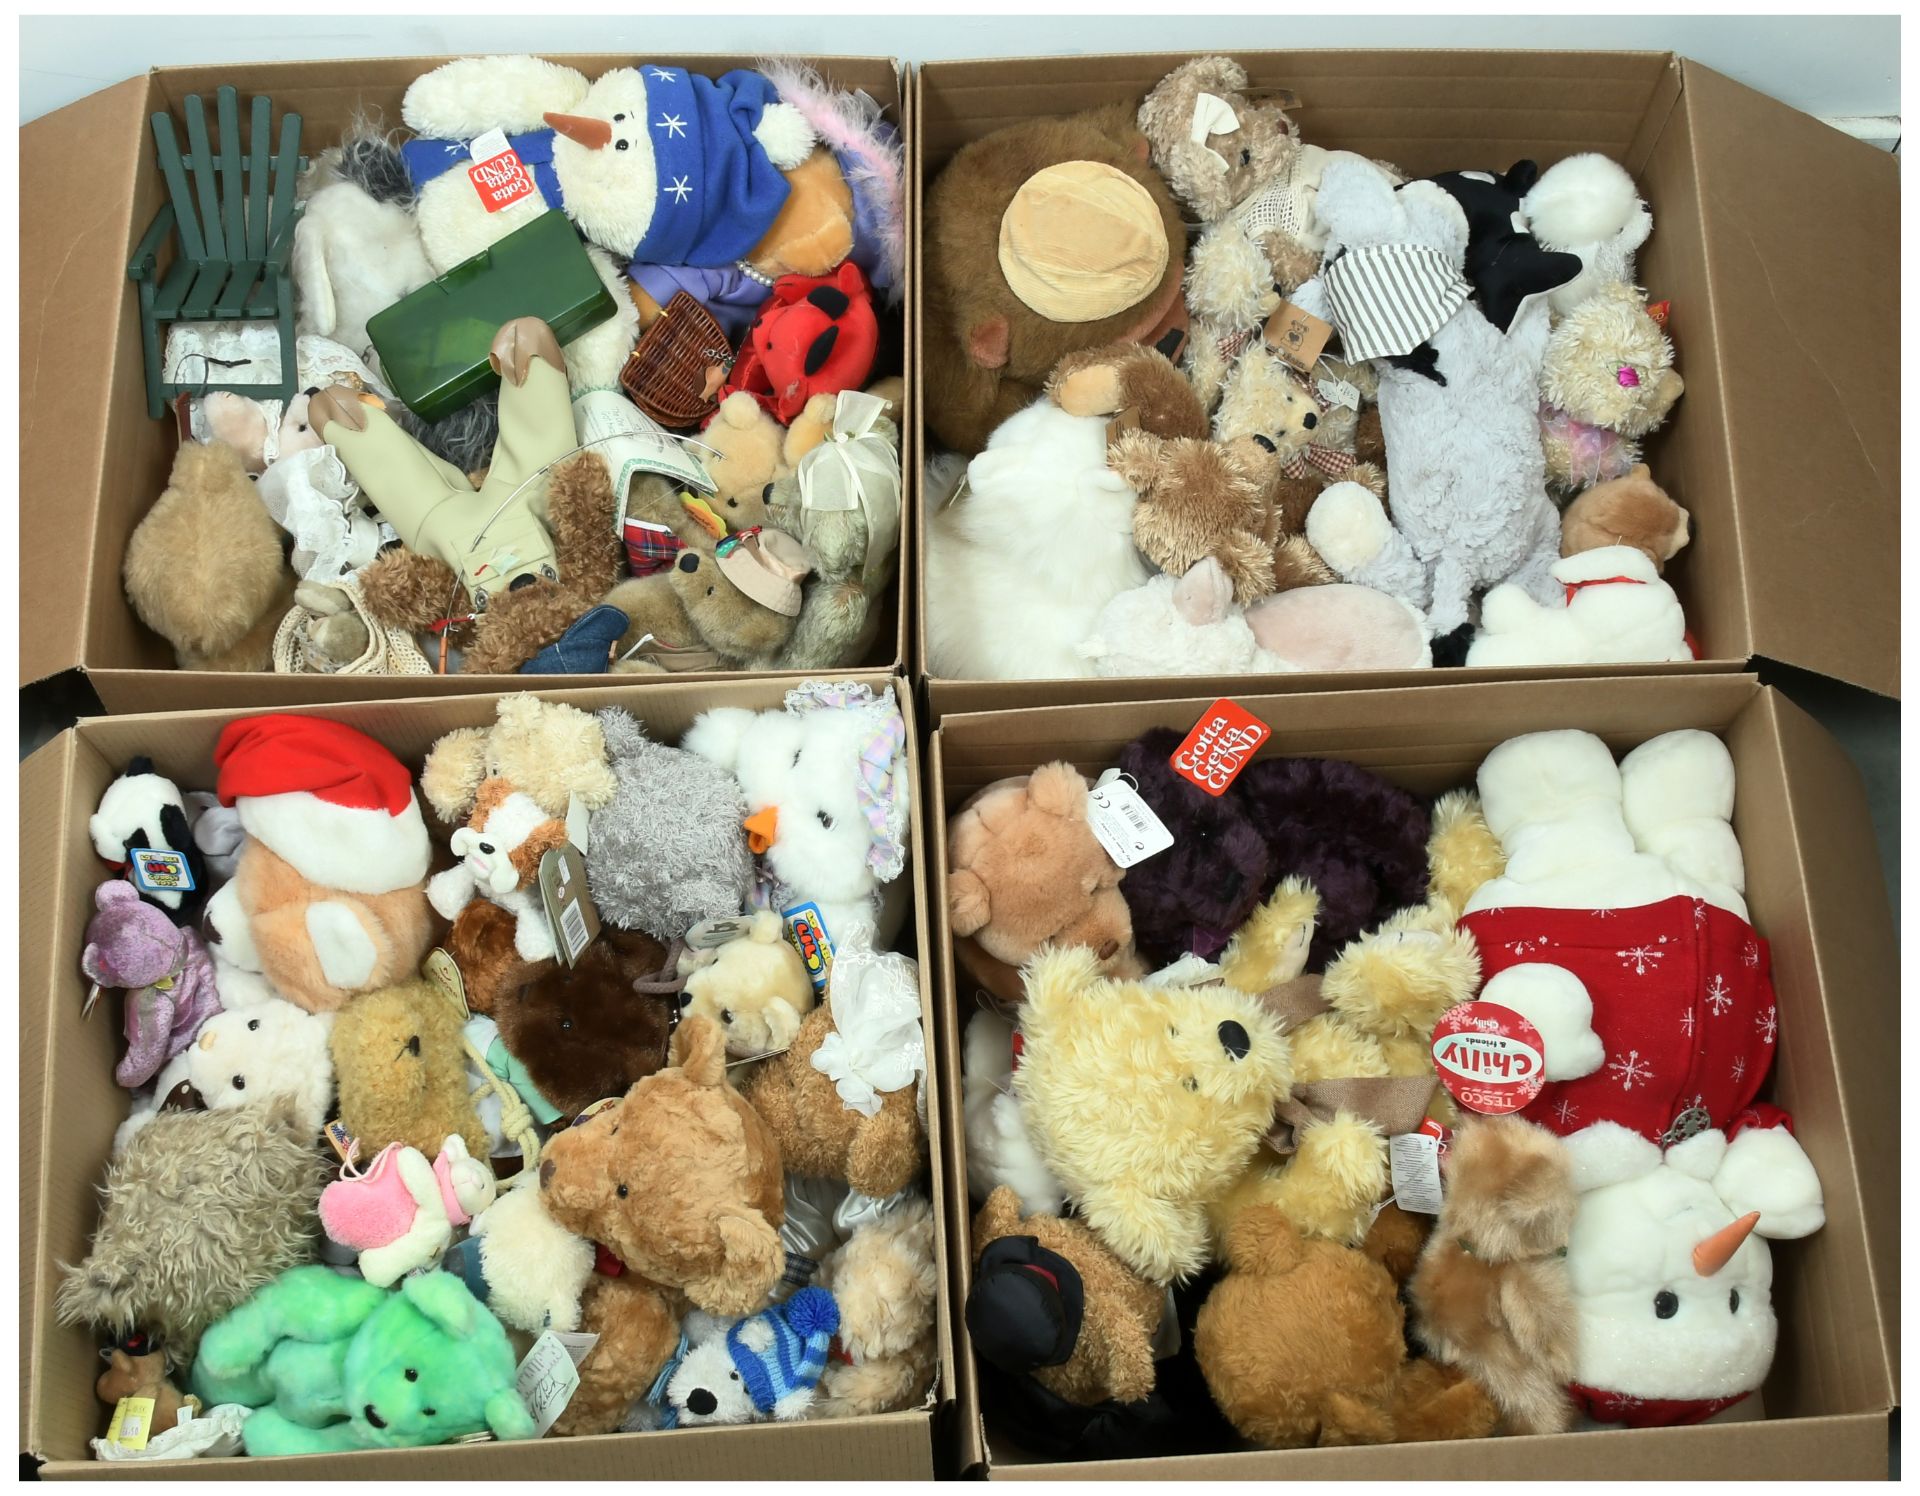 Large quantity of plush teddy bears including Gund, Russ, TY and others 